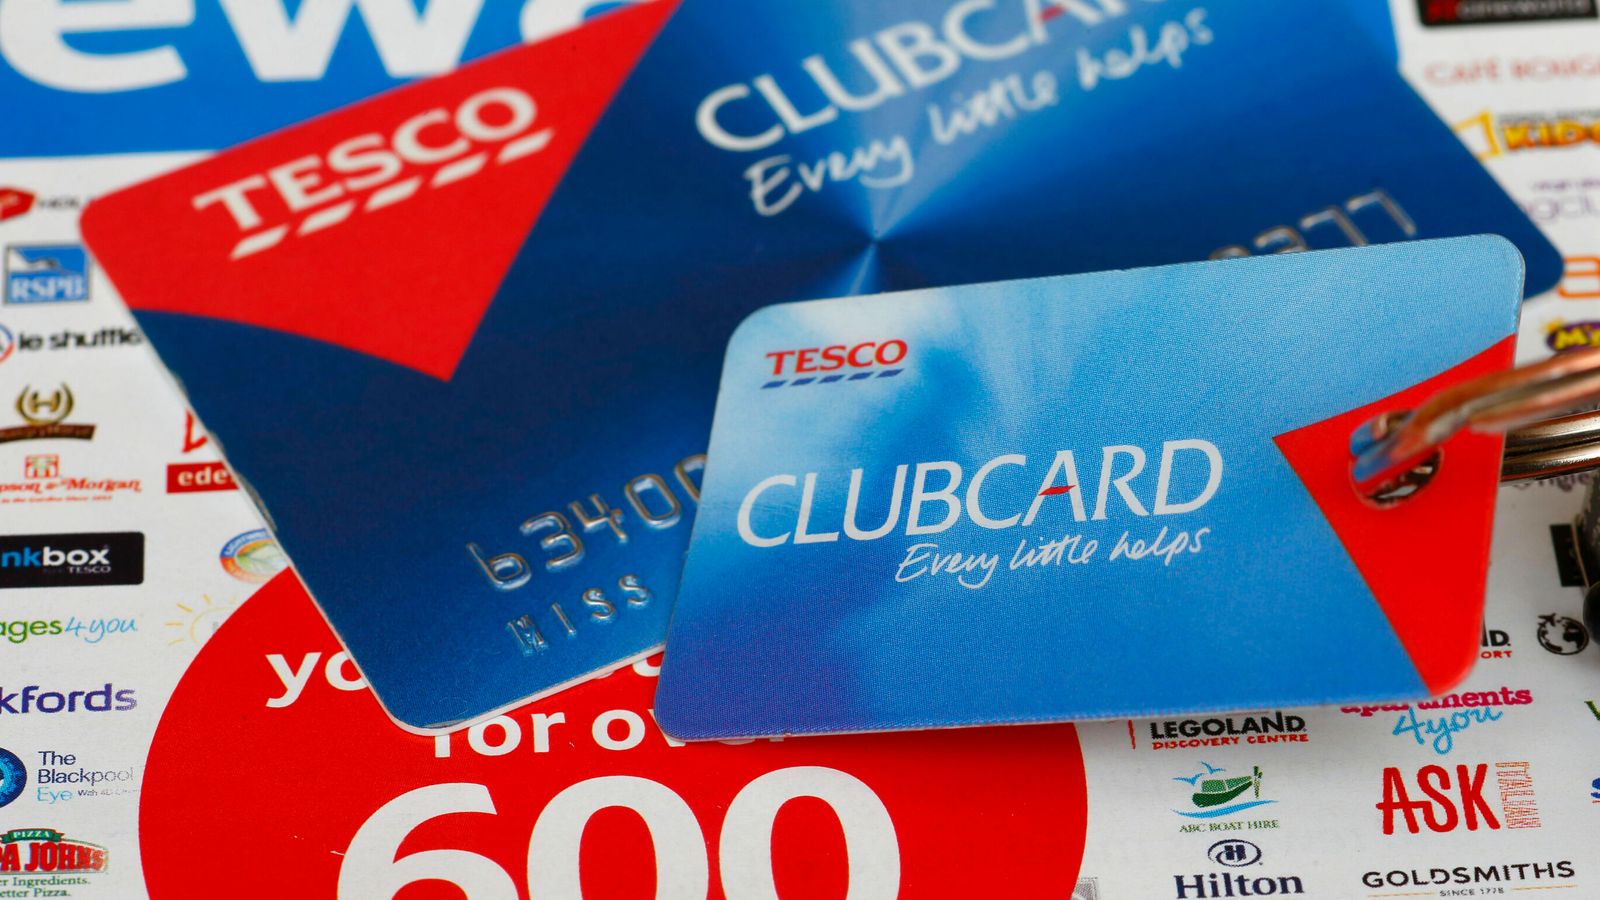 13m worth of unused Tesco Clubcard vouchers expire this month - worth up to 39m in savings